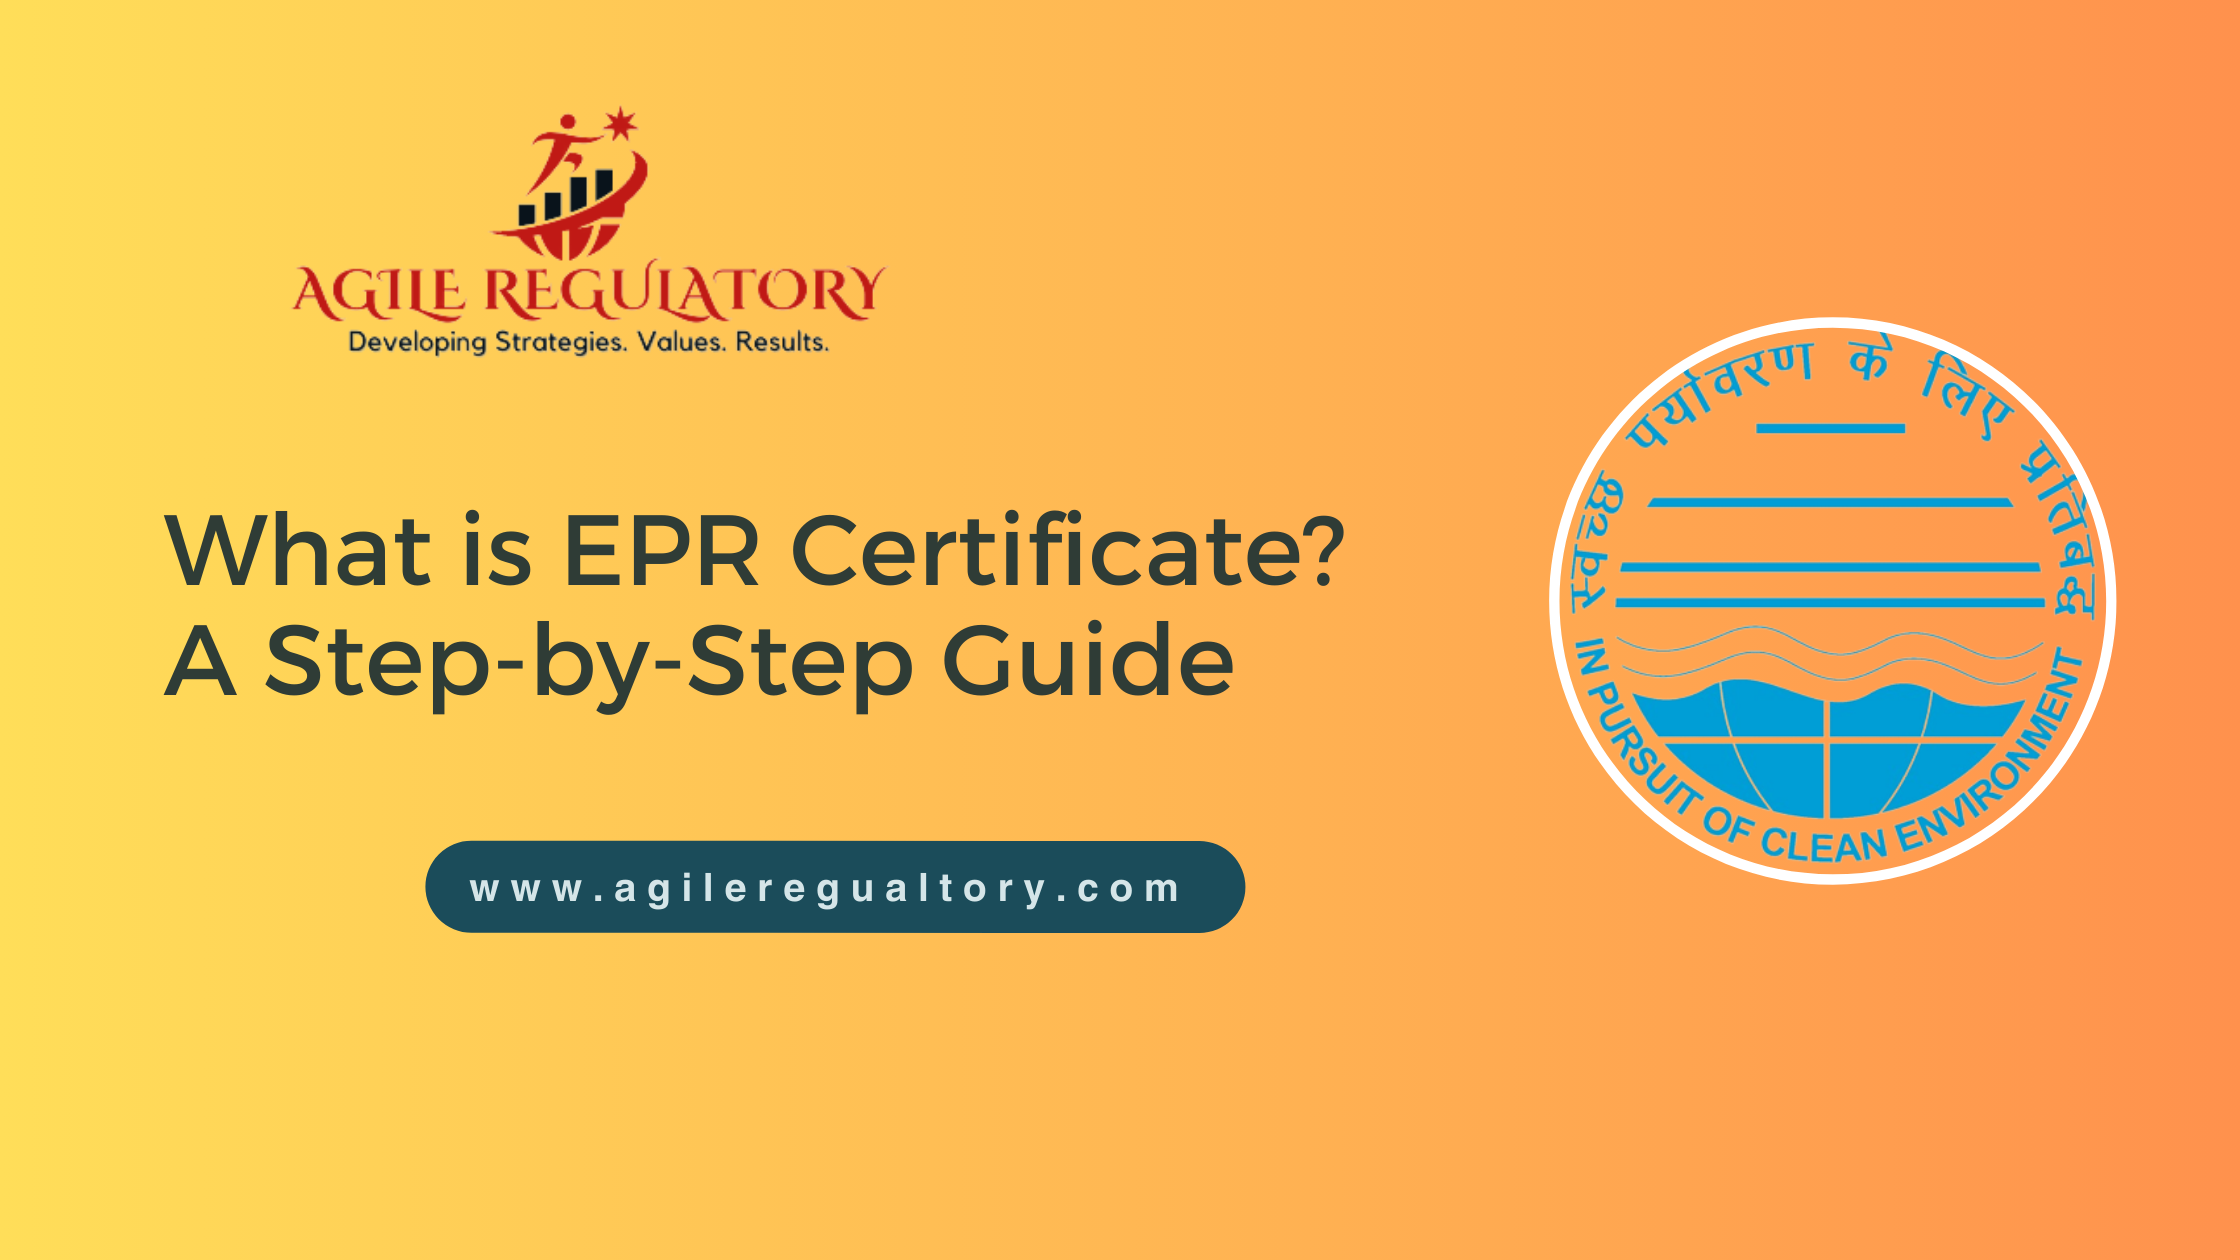 What is EPR Certificate?